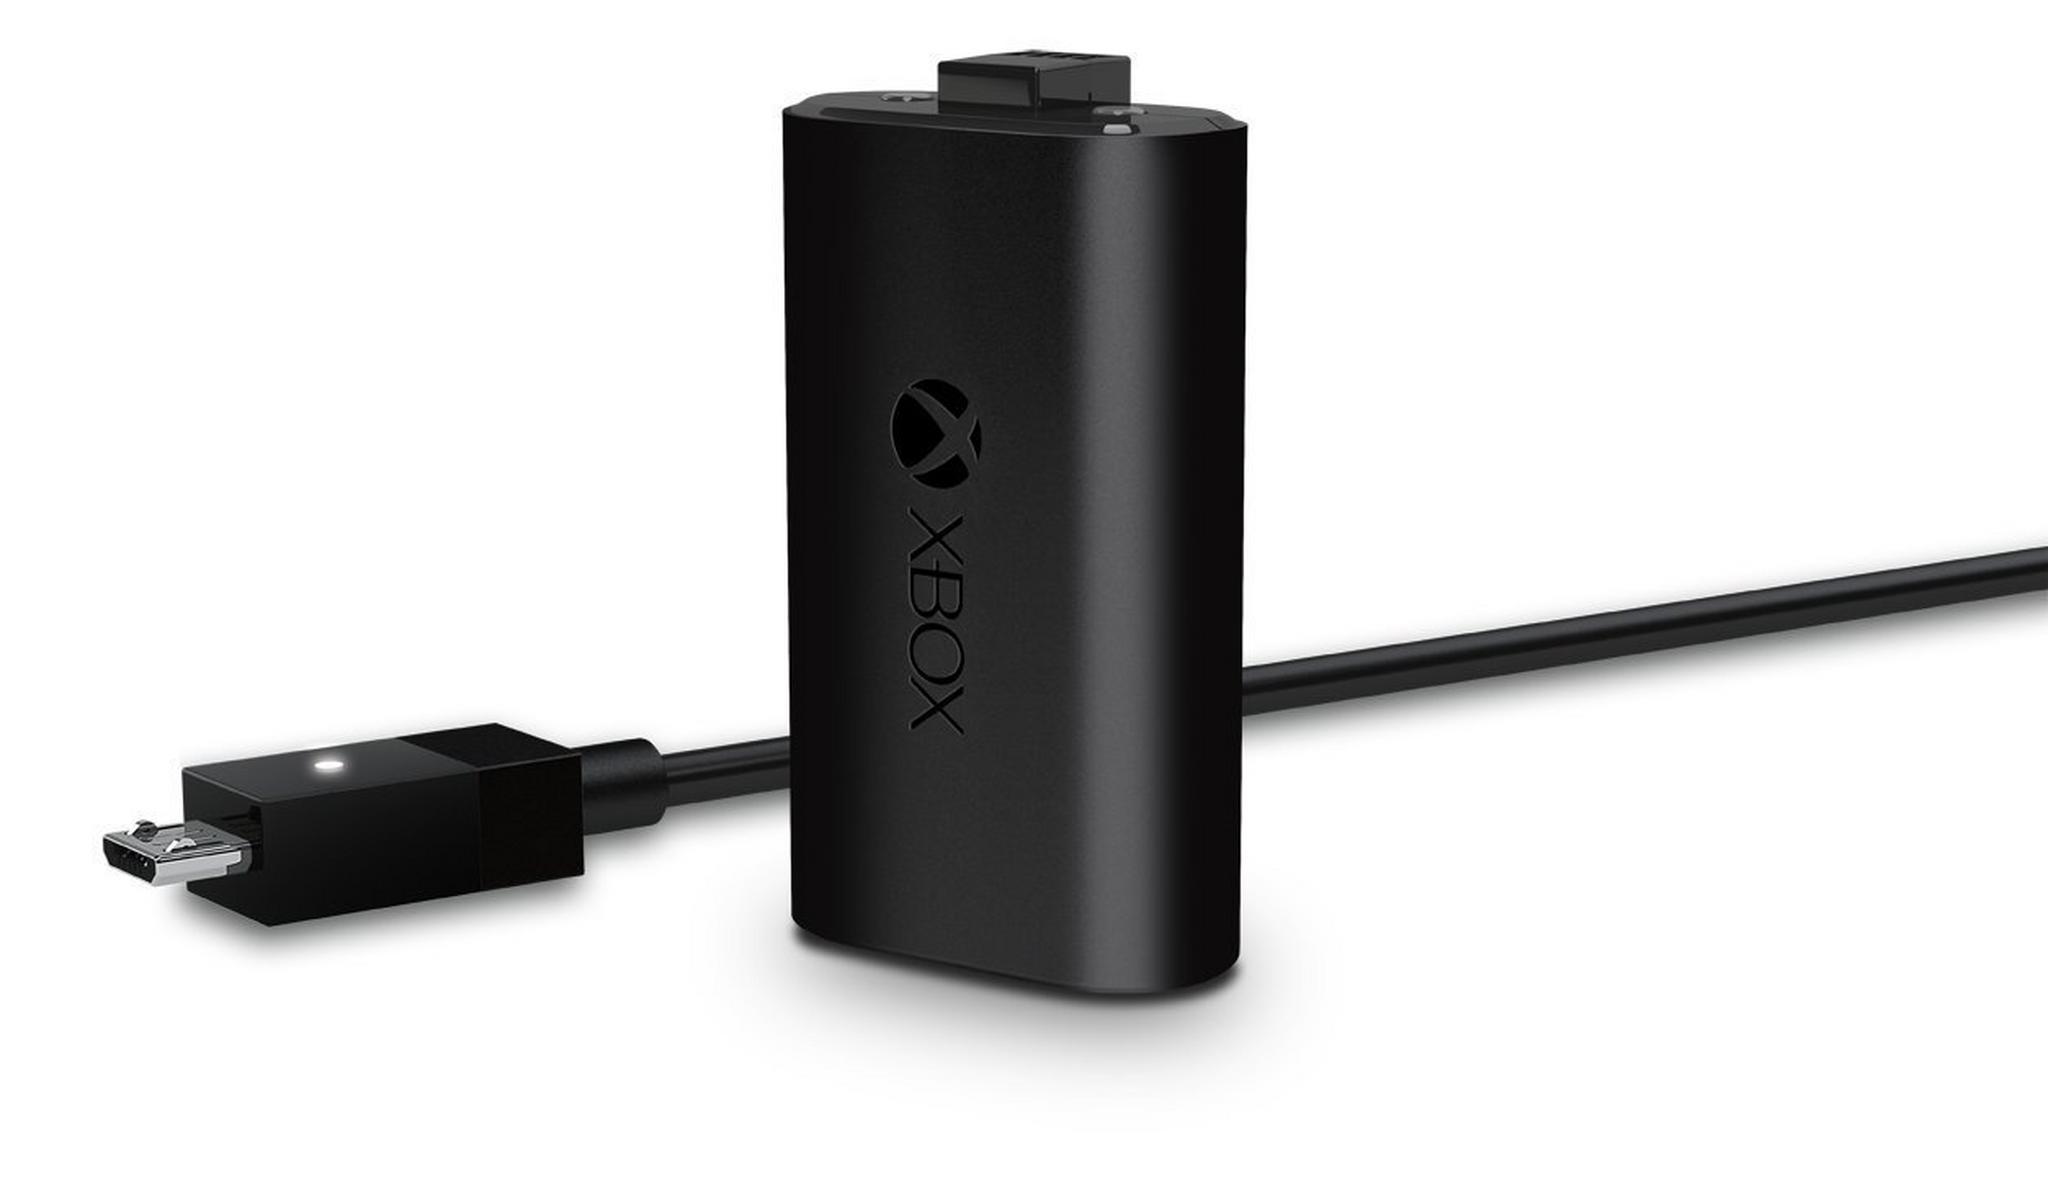 Microsoft Xbox One Play and Charge Kit S3V-00008